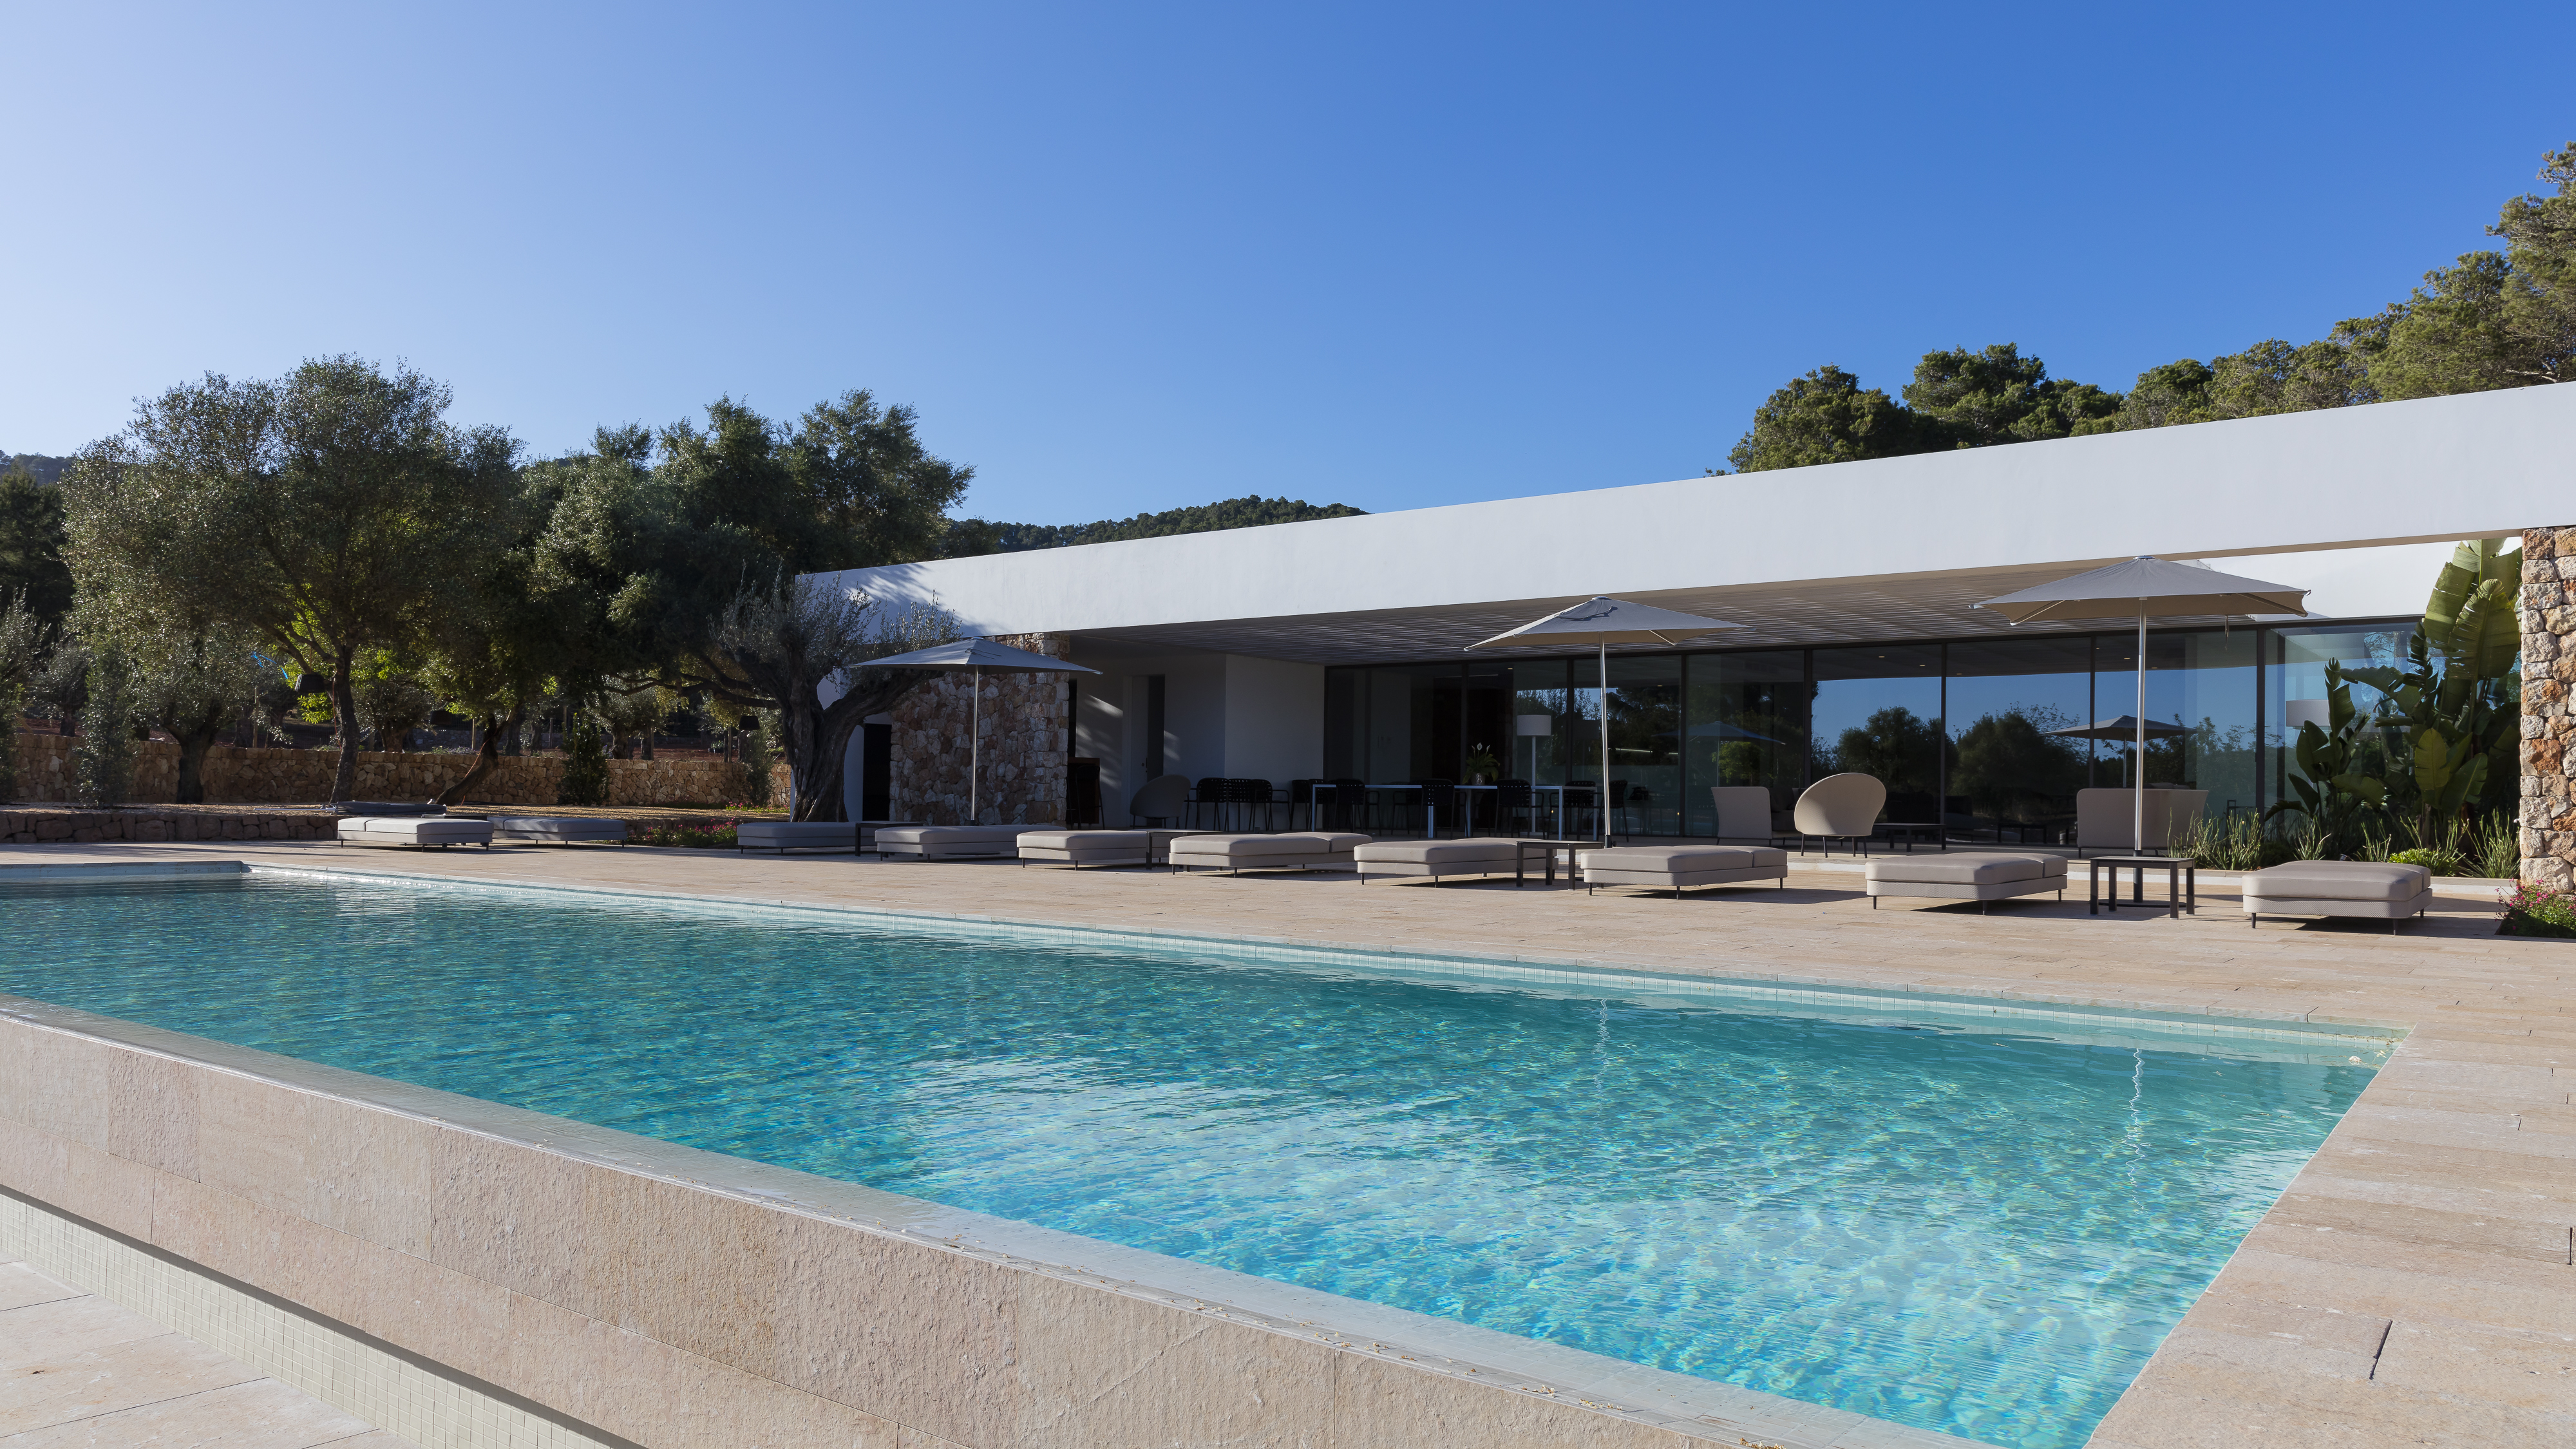 Top modern Ibizan property in the centre of the island